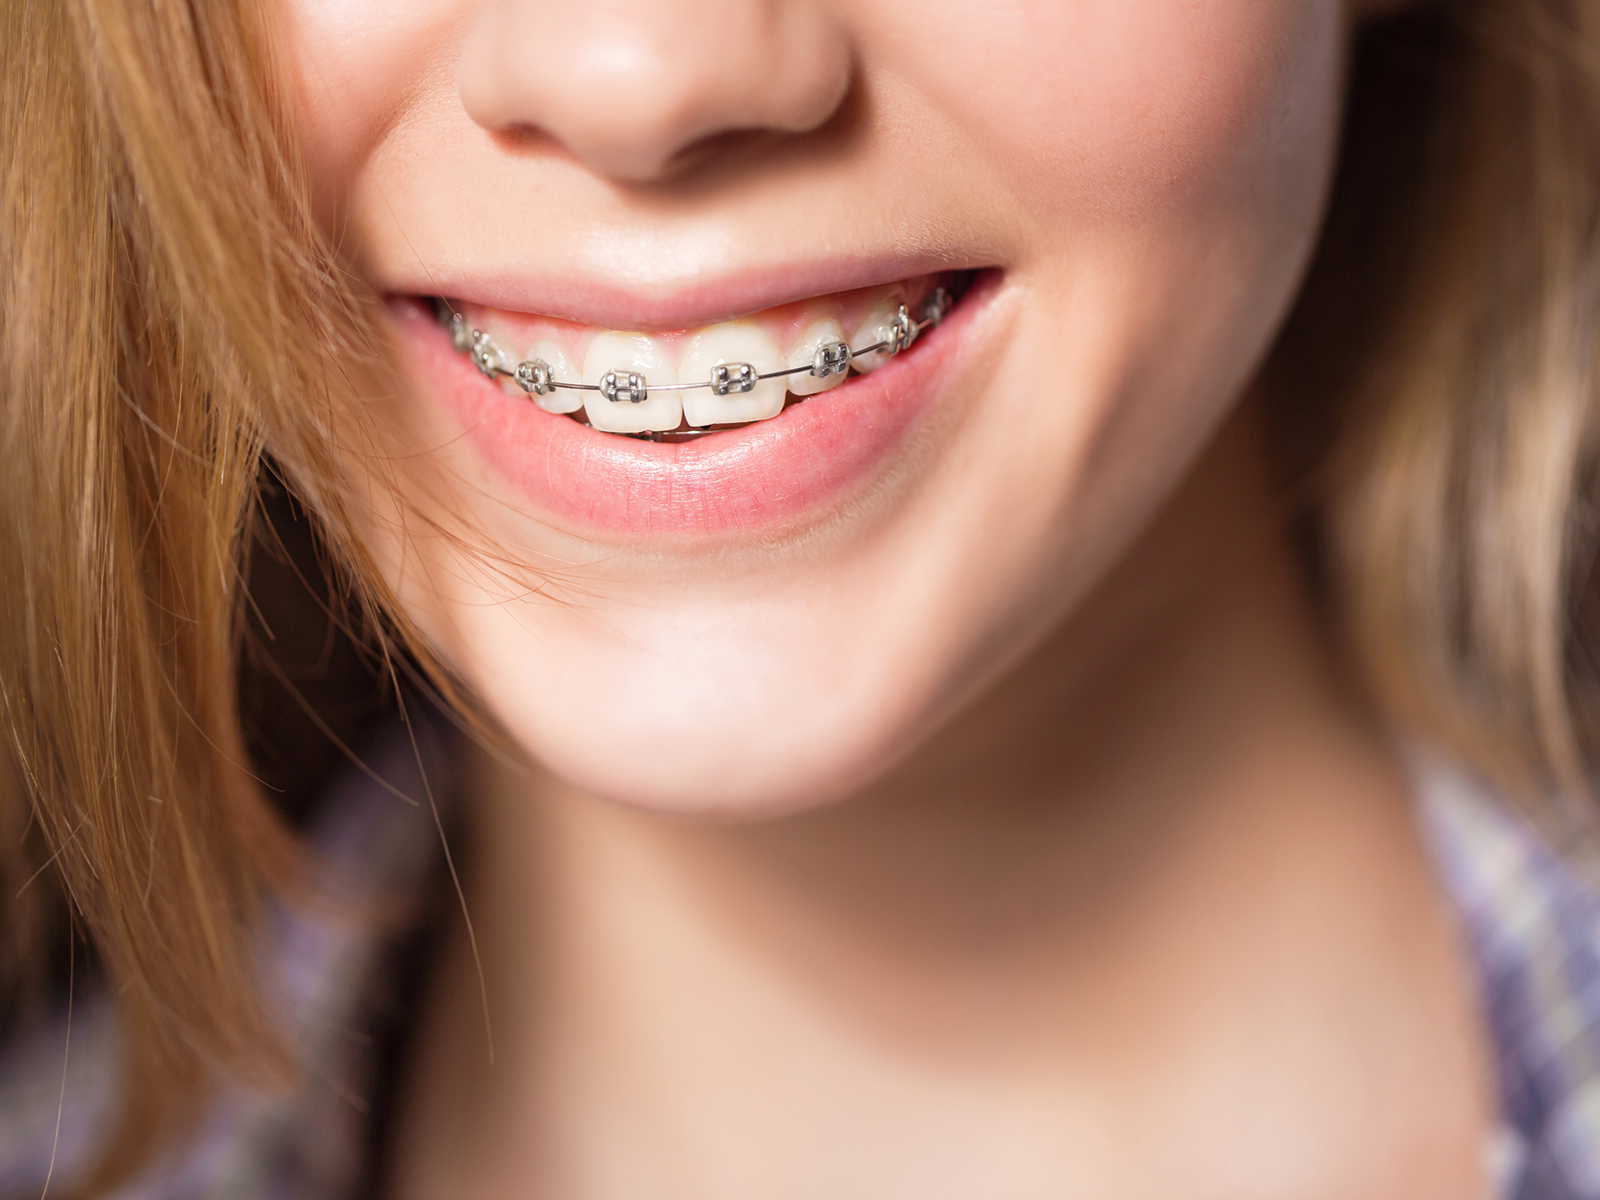 What happens in the first month of braces?